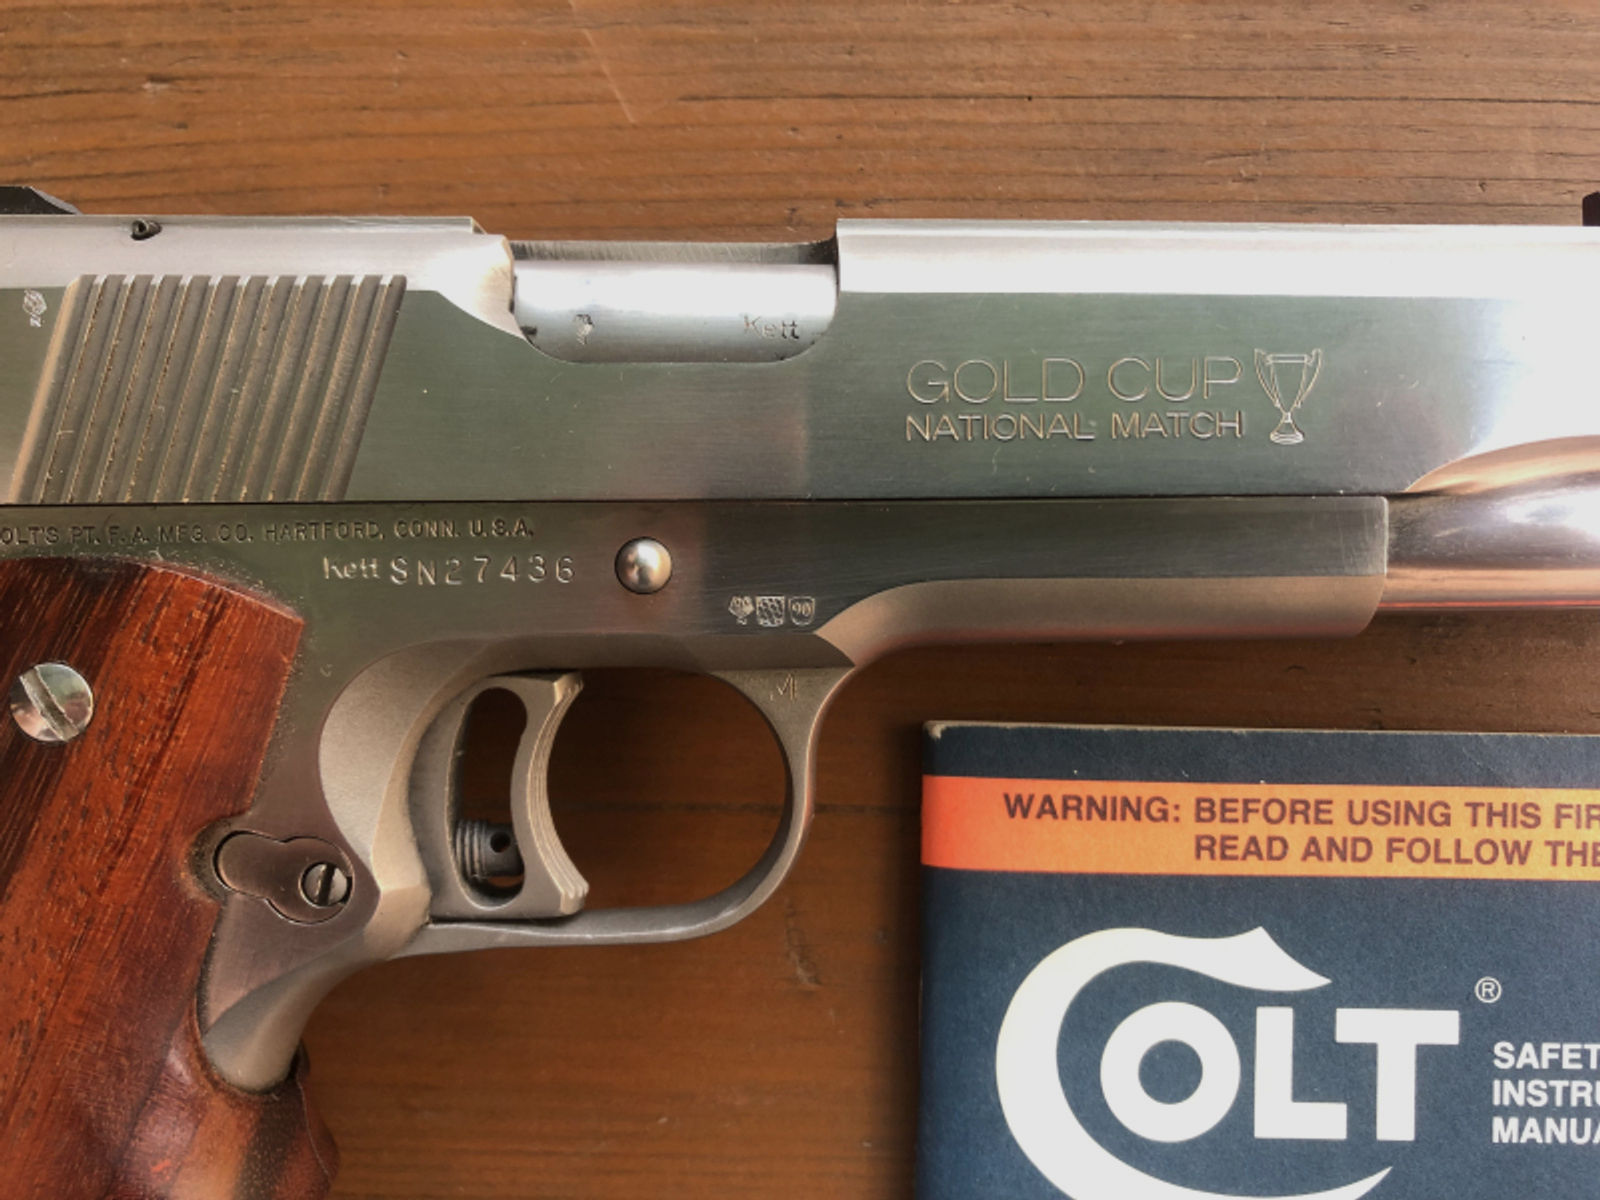 Colt Gold Cup National Match .45Auto 1911 MKIV Series `80